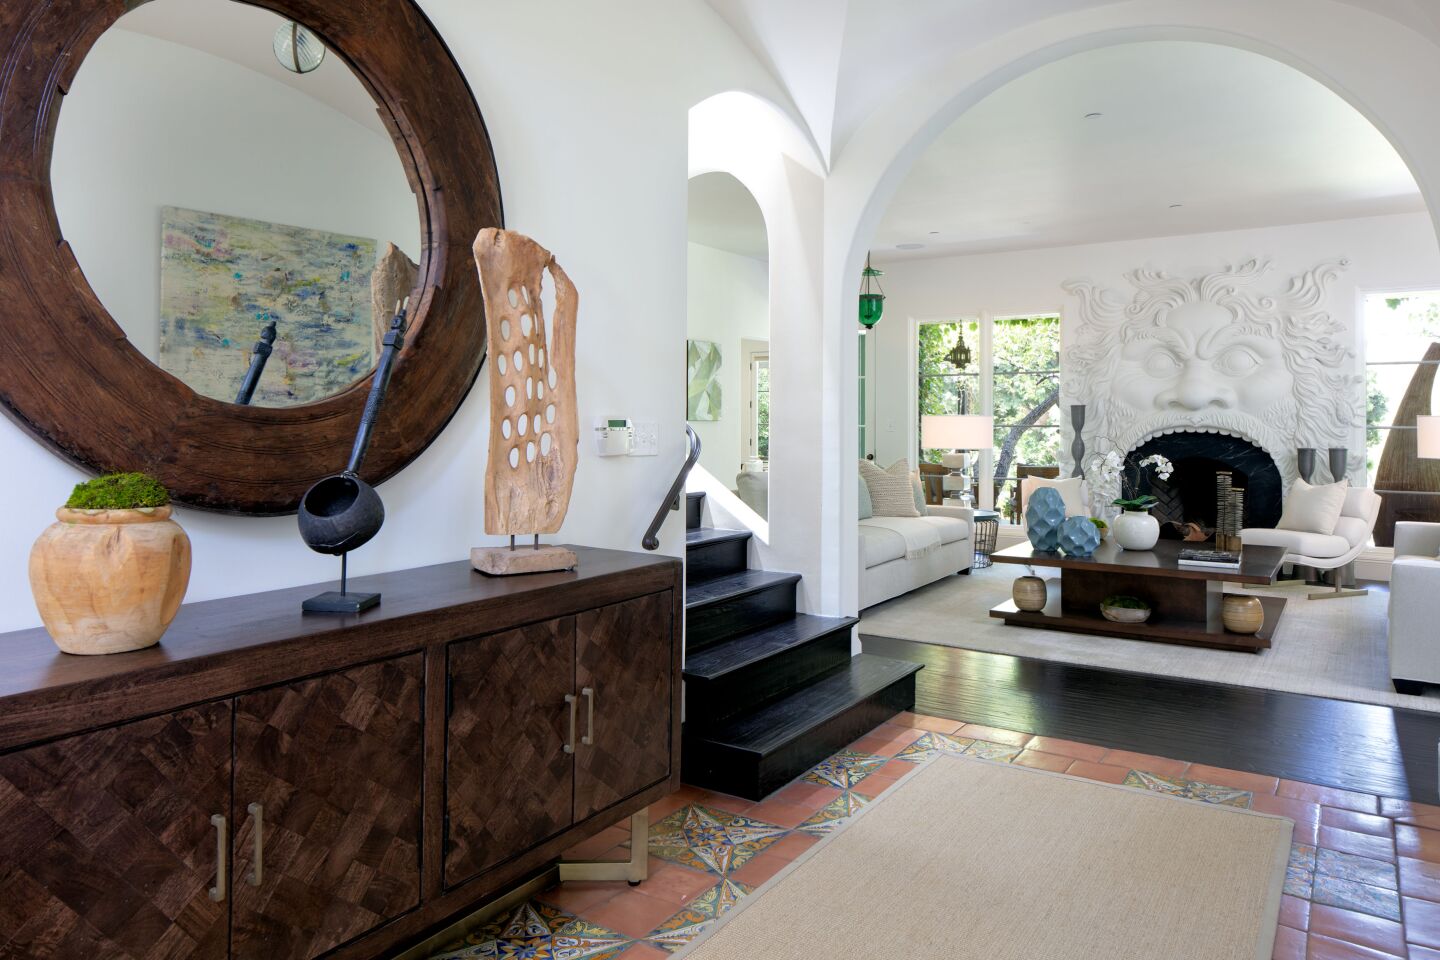 Geena Davis' Pacific Palisades house: the arched-ceiling entry